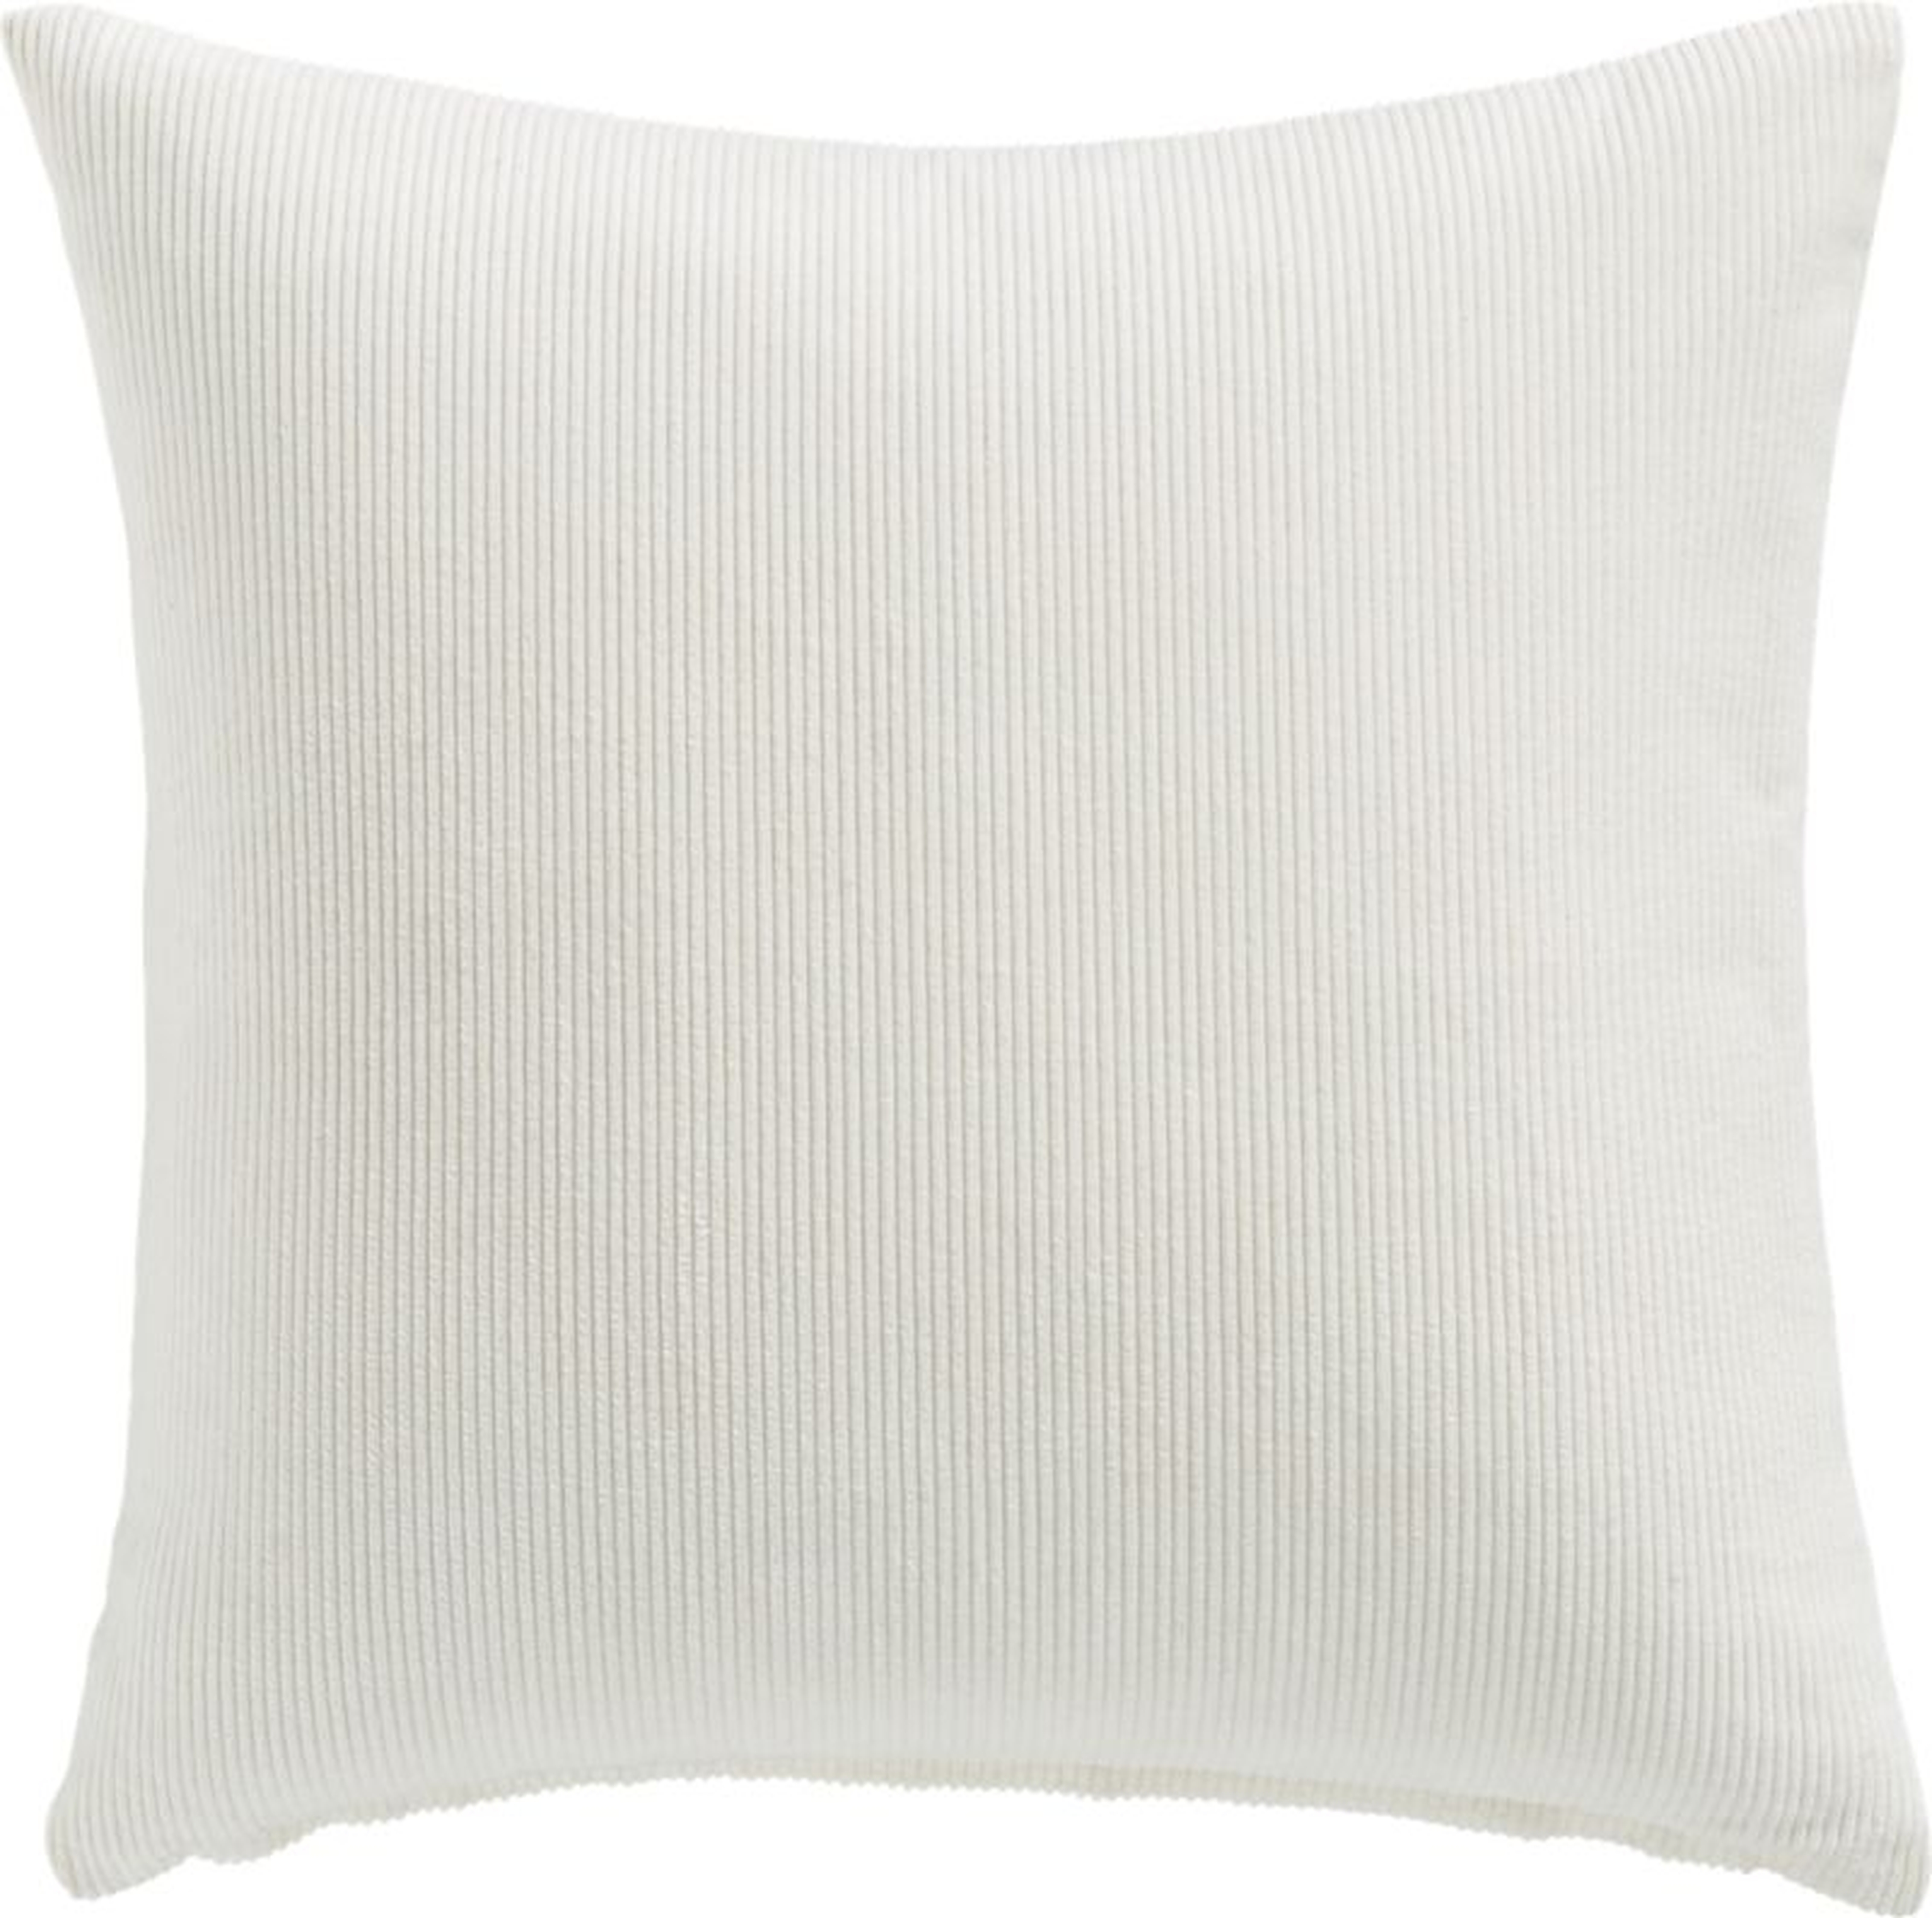 20" Anywhere Pillow with Down-Alternative Insert - CB2